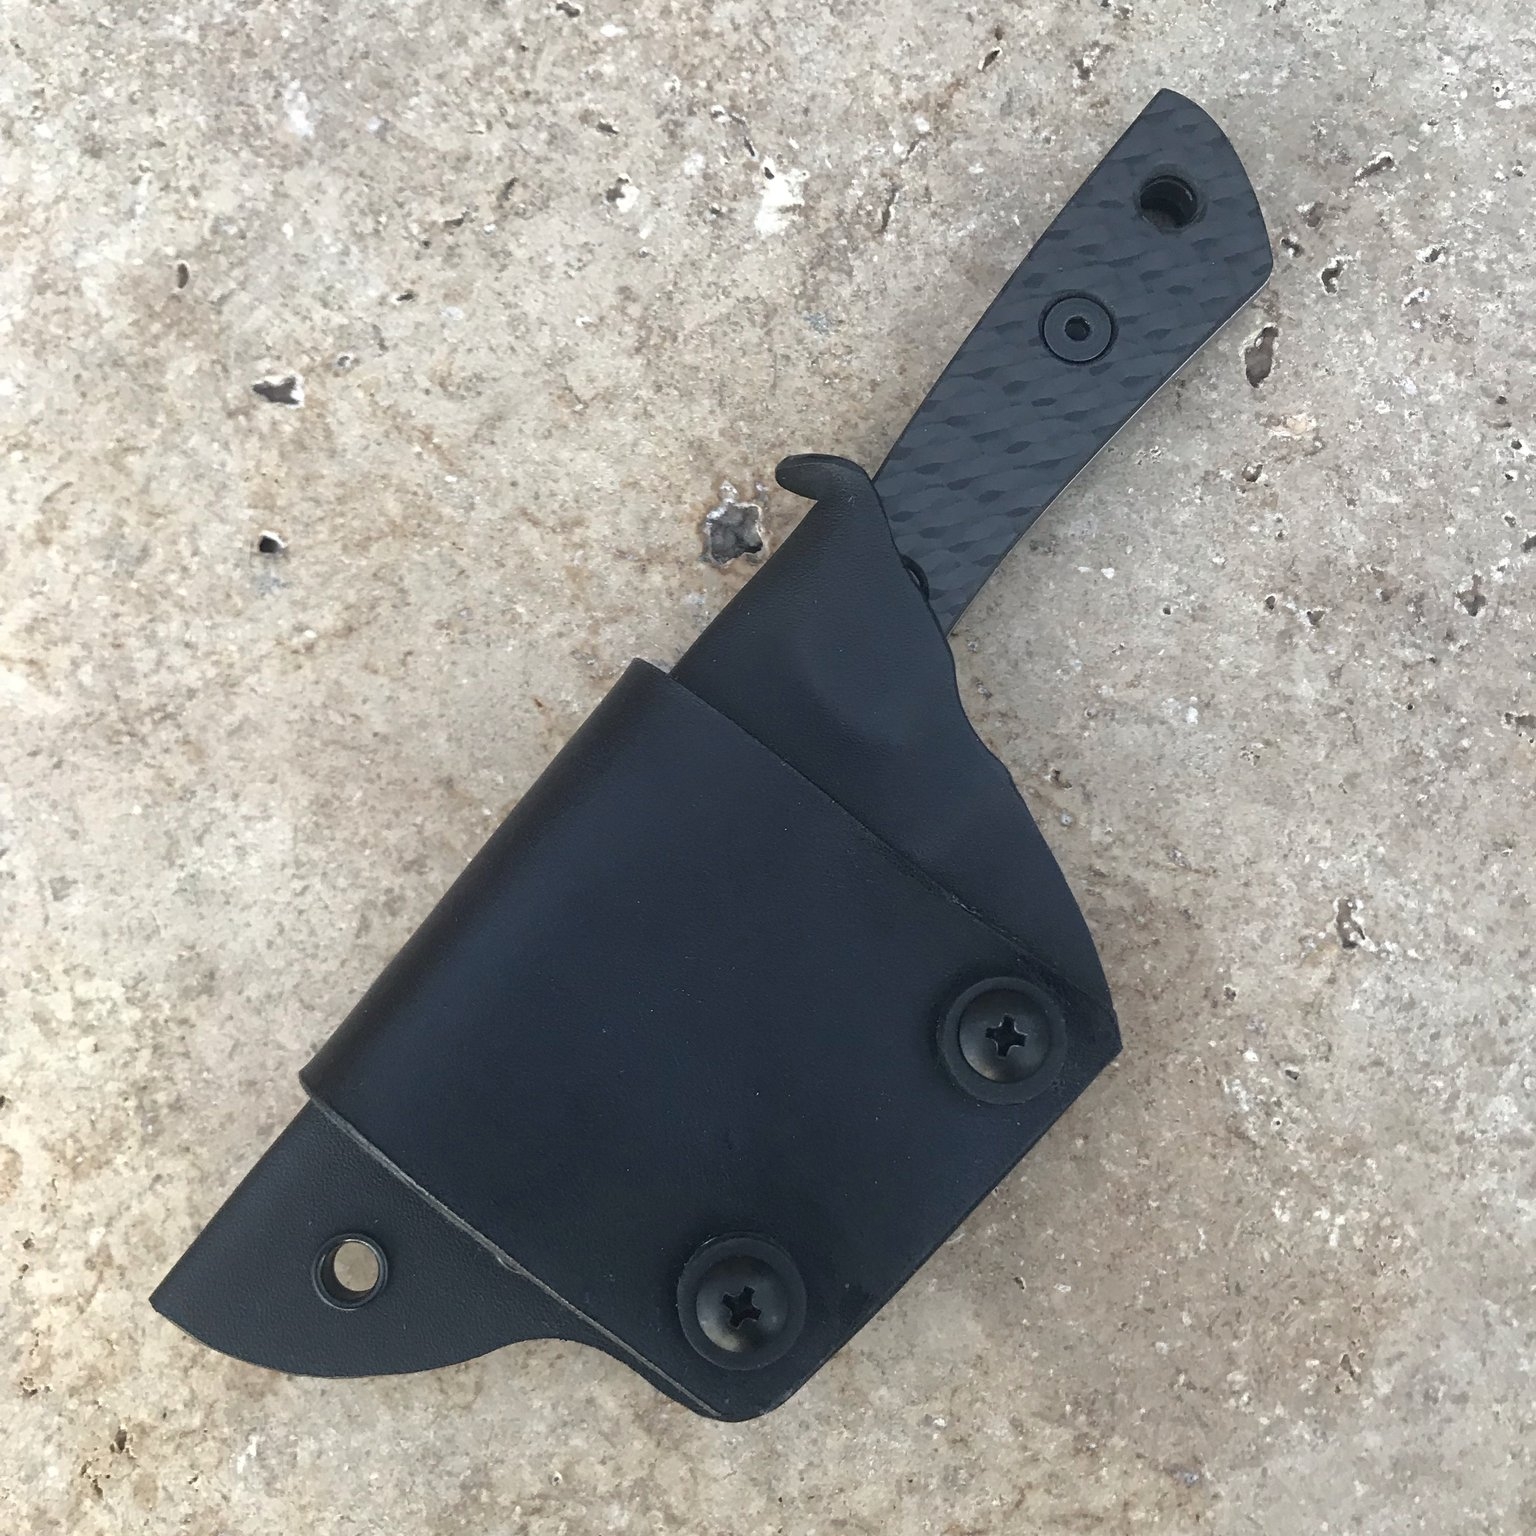 Just finished up this tactical Kiridashi in 1/4 O1, cerakote'd, G10 scales,  kydex sheath - it's thicc! : r/Bladesmith